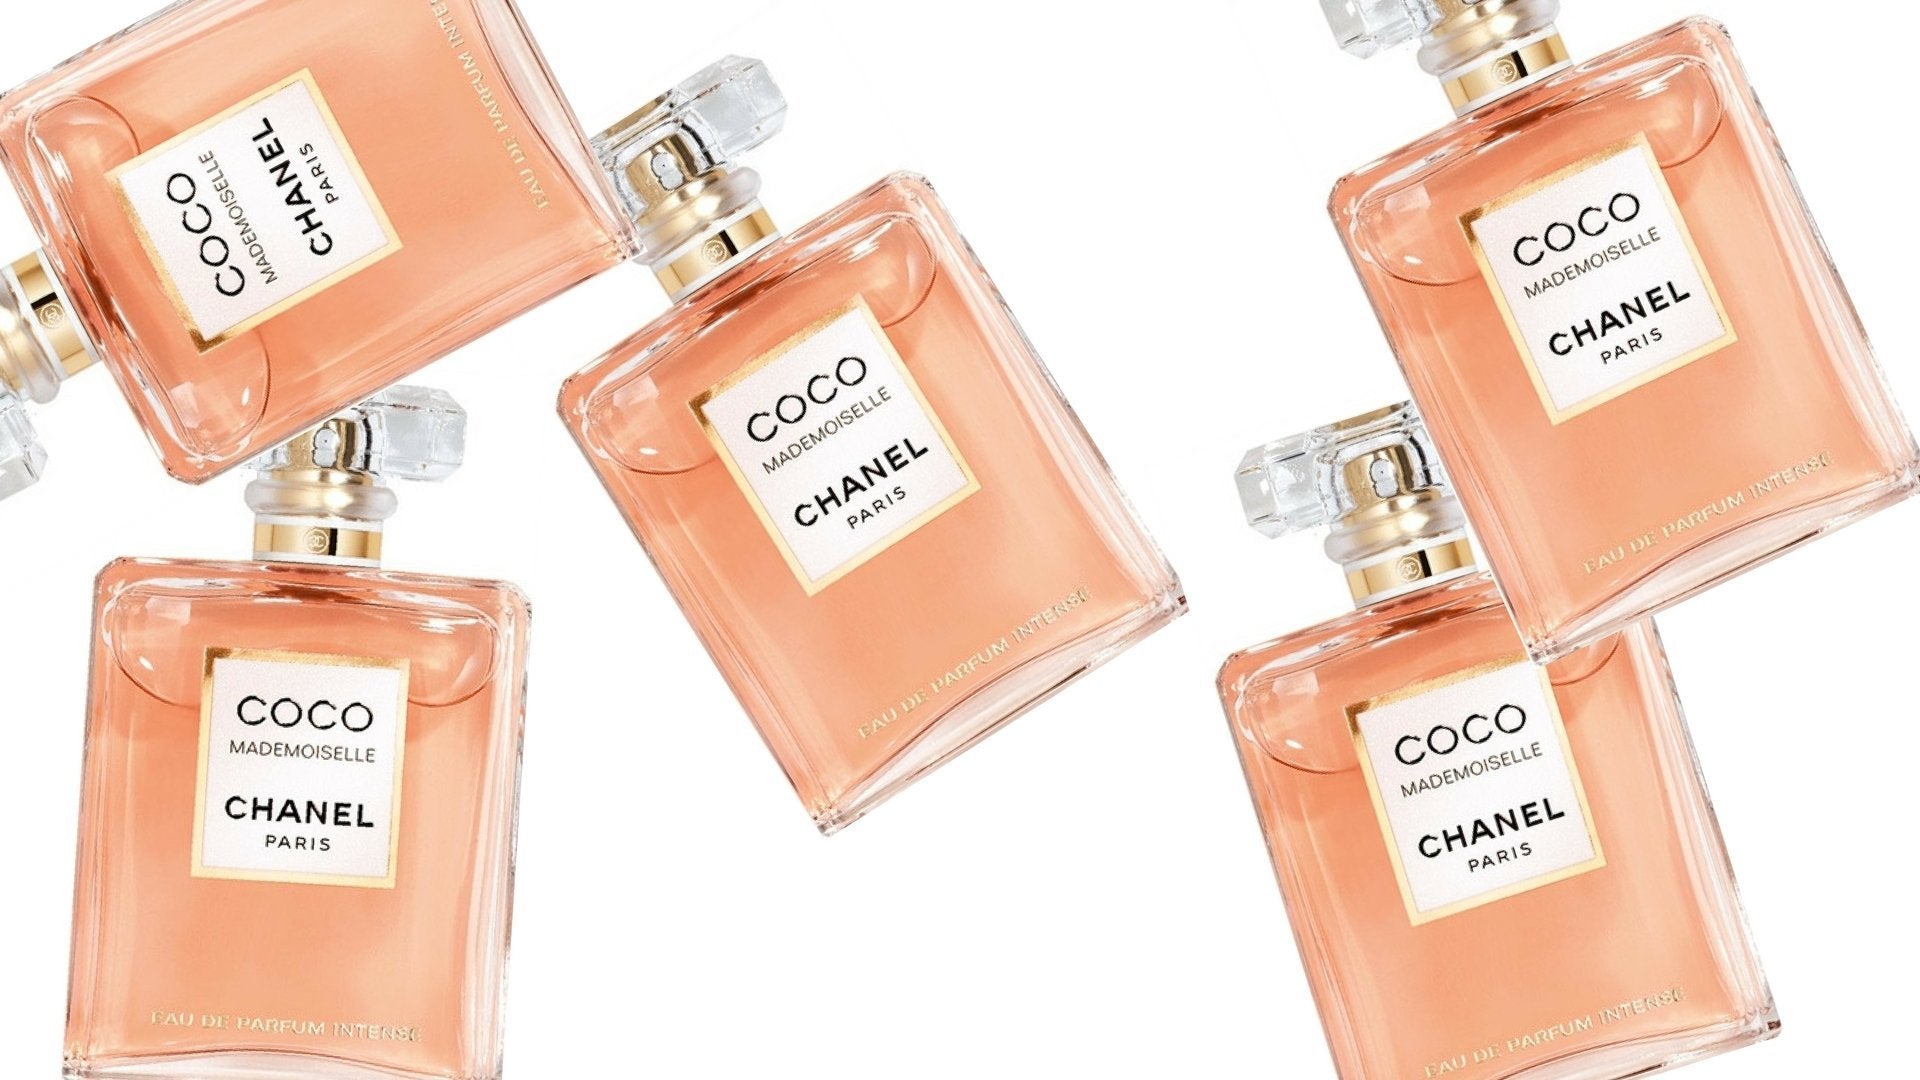 Chanel Coco Mademoiselle Review: Australia's Best Fragrance? - My Perfume Shop